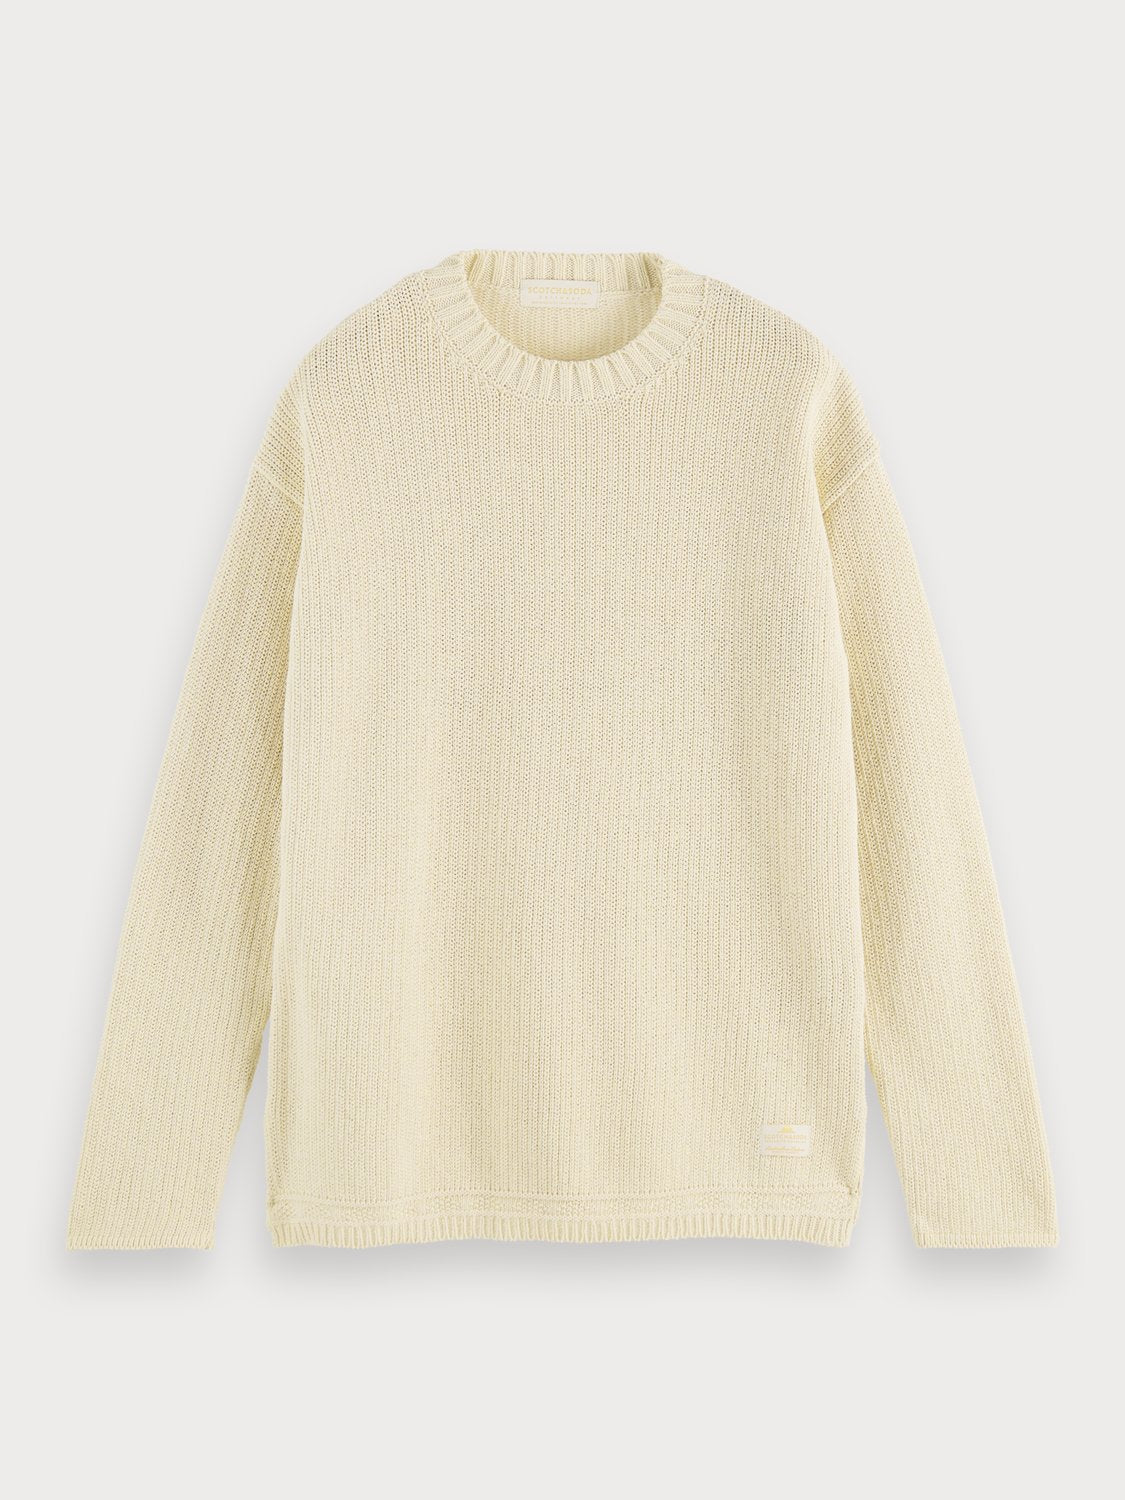 Scotch and Soda, Structured knit recycled cotton blend sweater in Sunlit  Yellow Melange